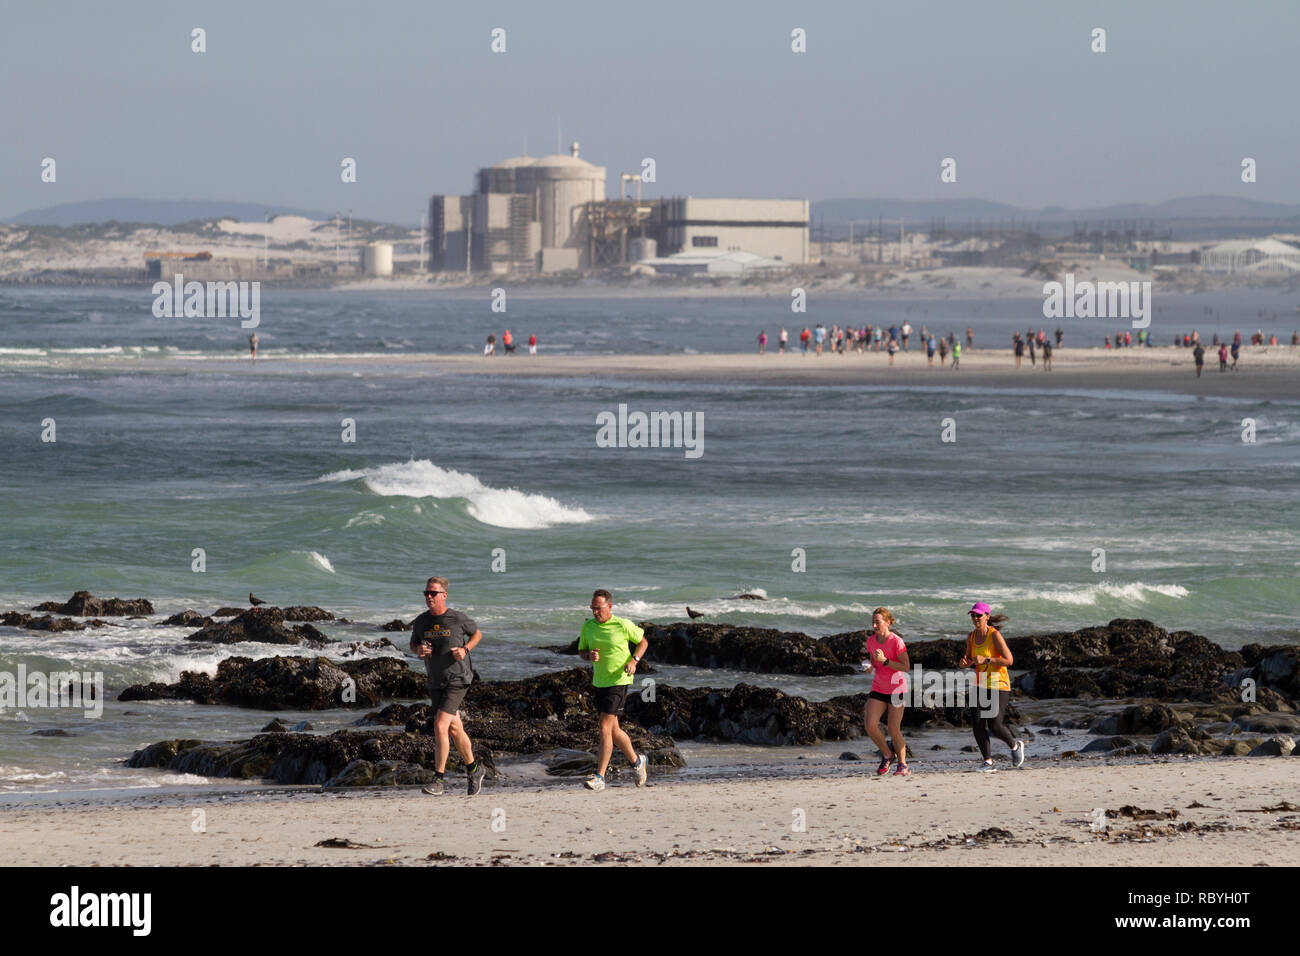 Parkrun jog on the beach at Melkbosstrand with Koeberg Power Station in the background. Parkrun is a global movement of Saturday 5km runs outside. Stock Photo